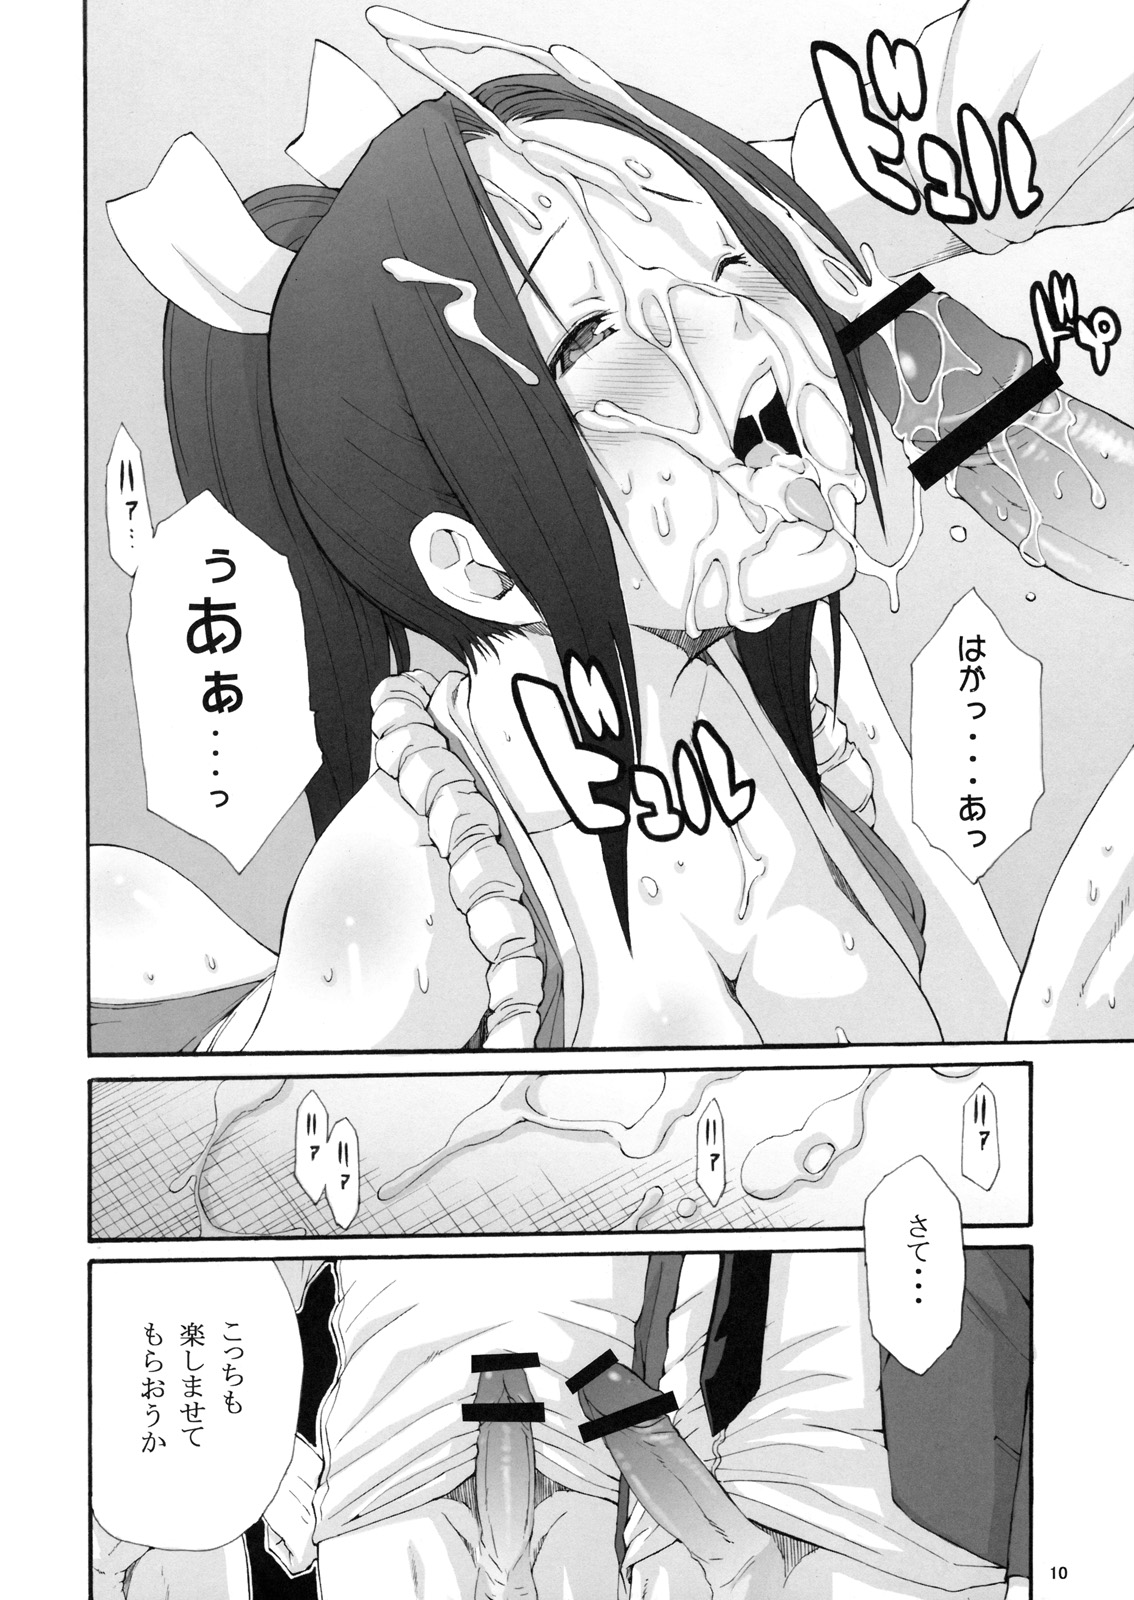 [3g (Junkie)] DOF Mai (King of Fighters) page 9 full